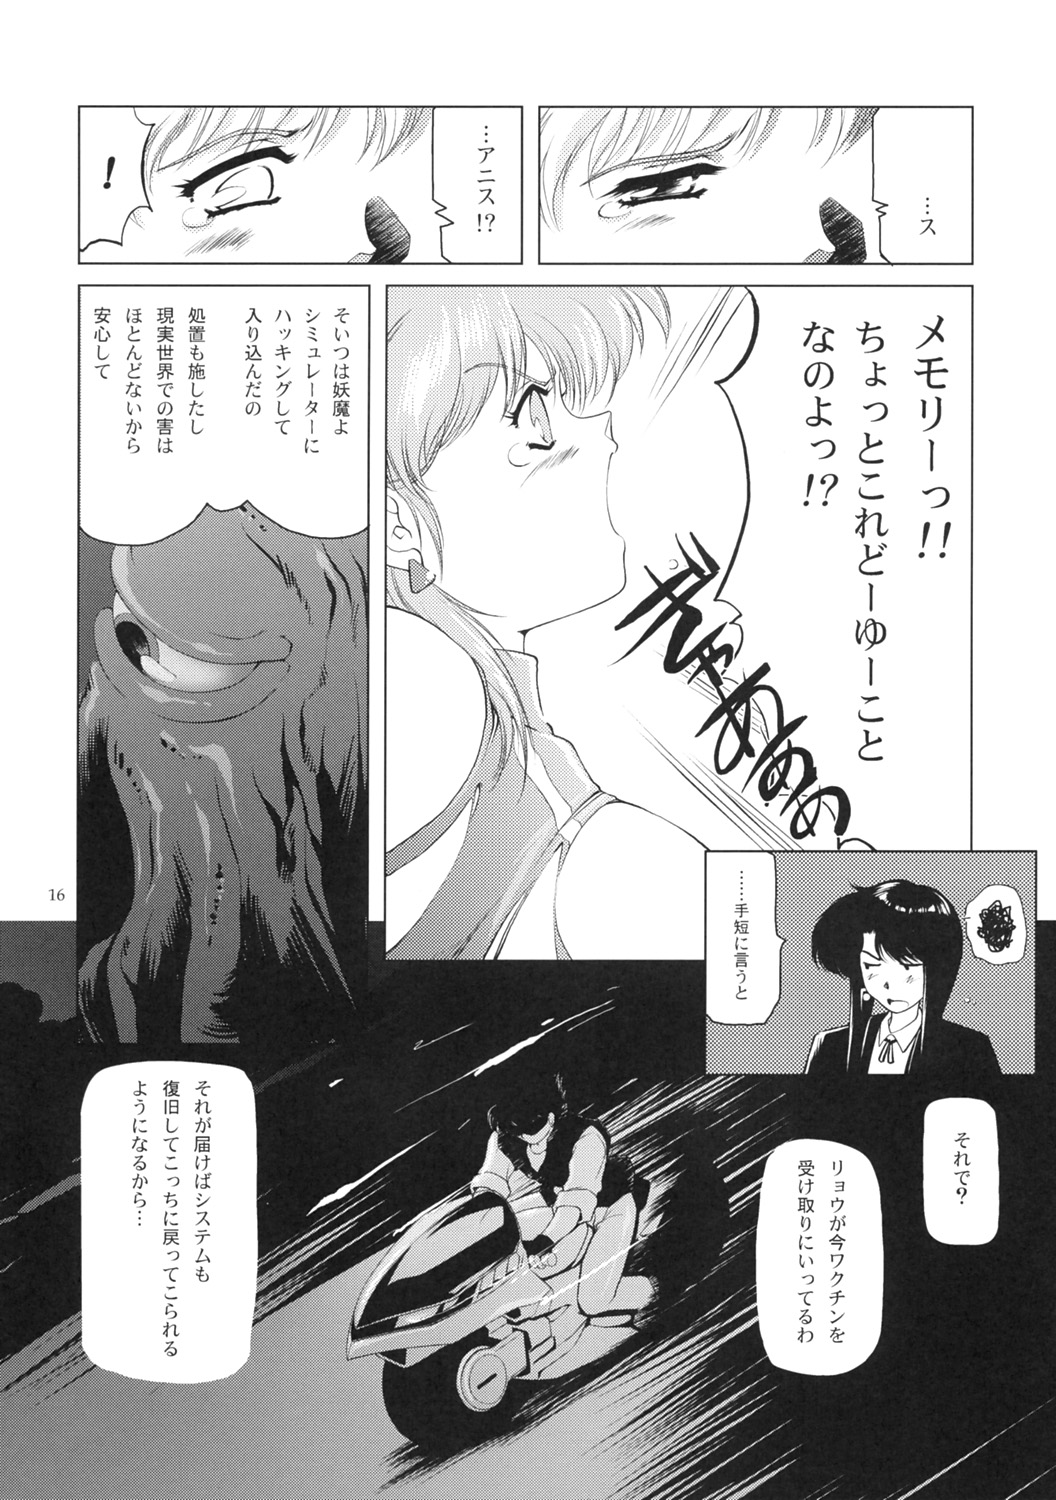 (C67) [Type-R (Rance)] Manga Onsoku no Are (Sonic Soldier Borgman) page 17 full